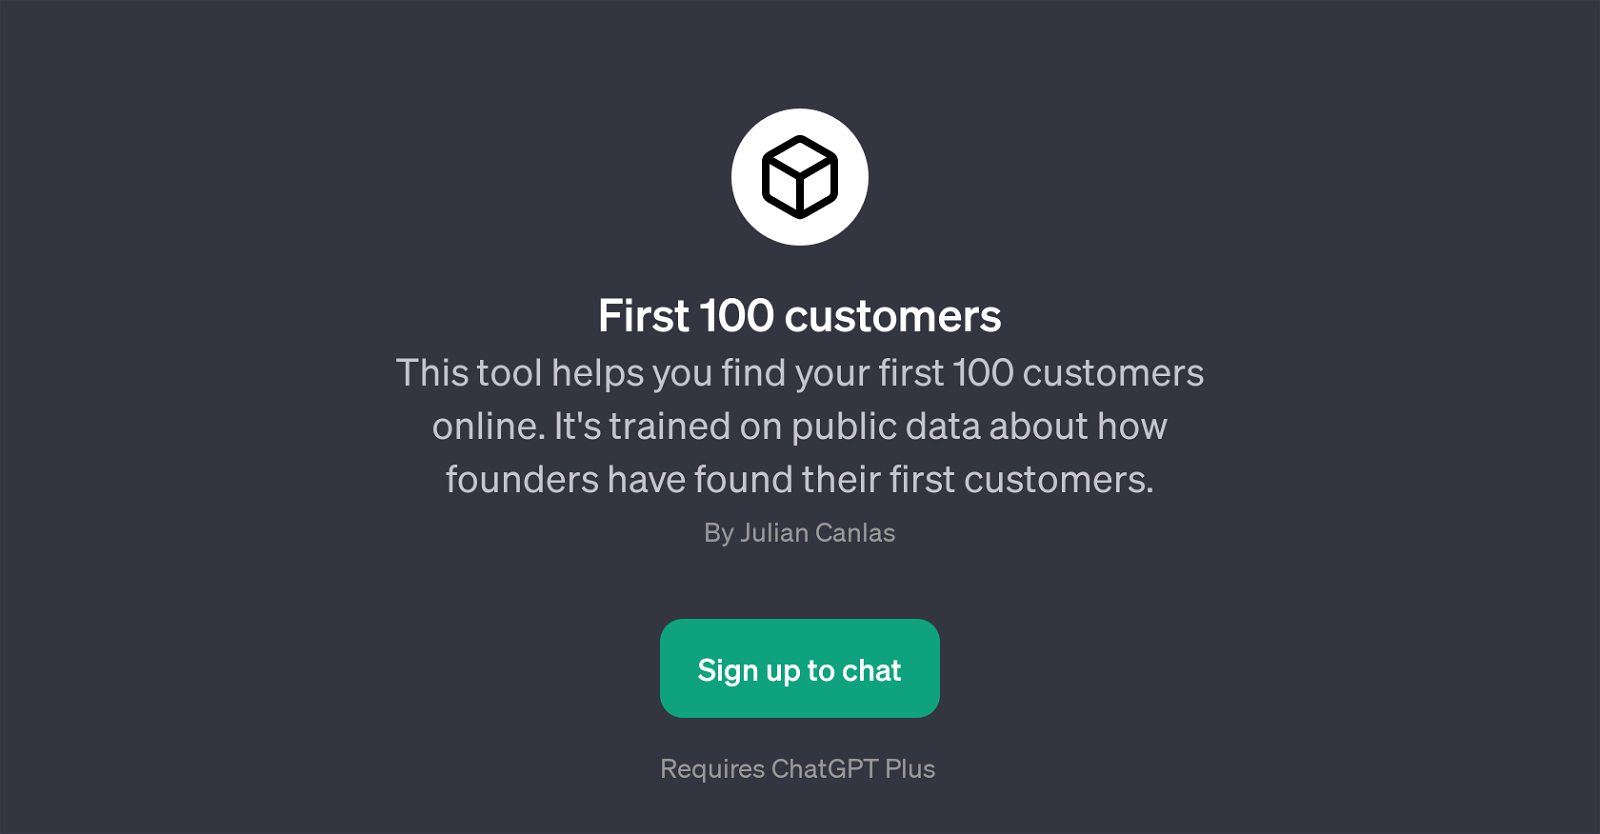 First 100 Customers website